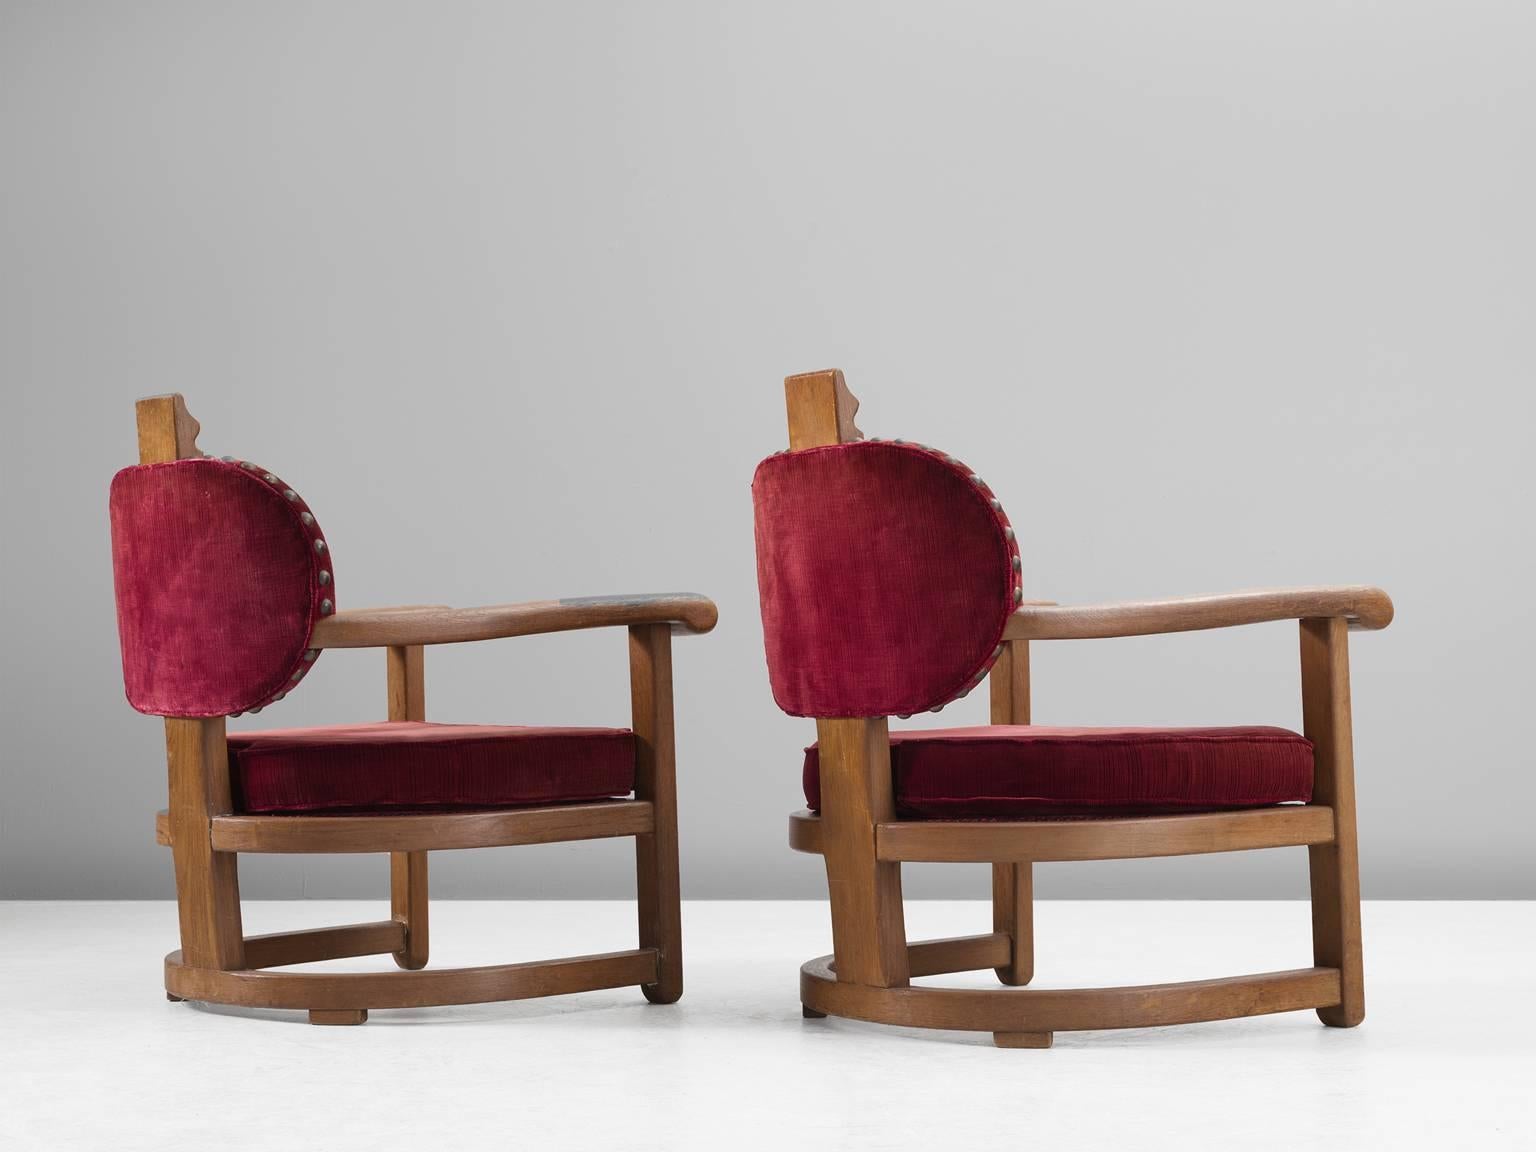 European Set of Two Art Deco Lounge Chairs in Solid Oak and Red Upholstery